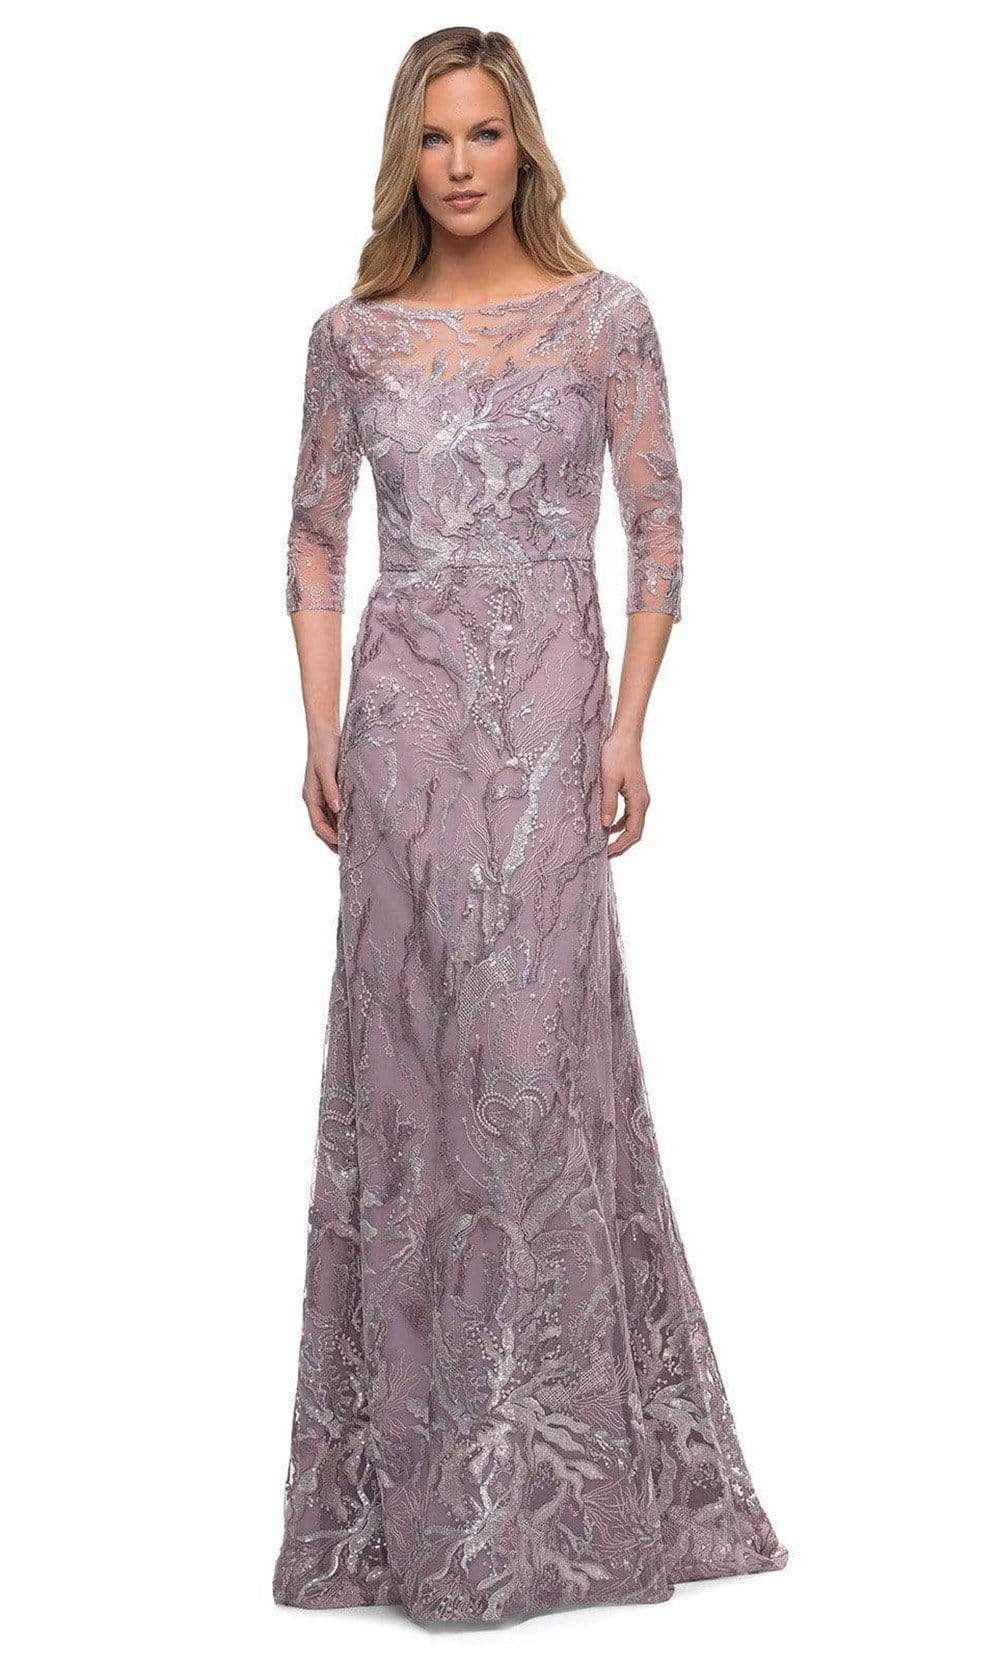 La Femme - 29233 Sheer Sleeve Embroidered A-line Gown Mother of the Bride Dresses 2 / Mauve